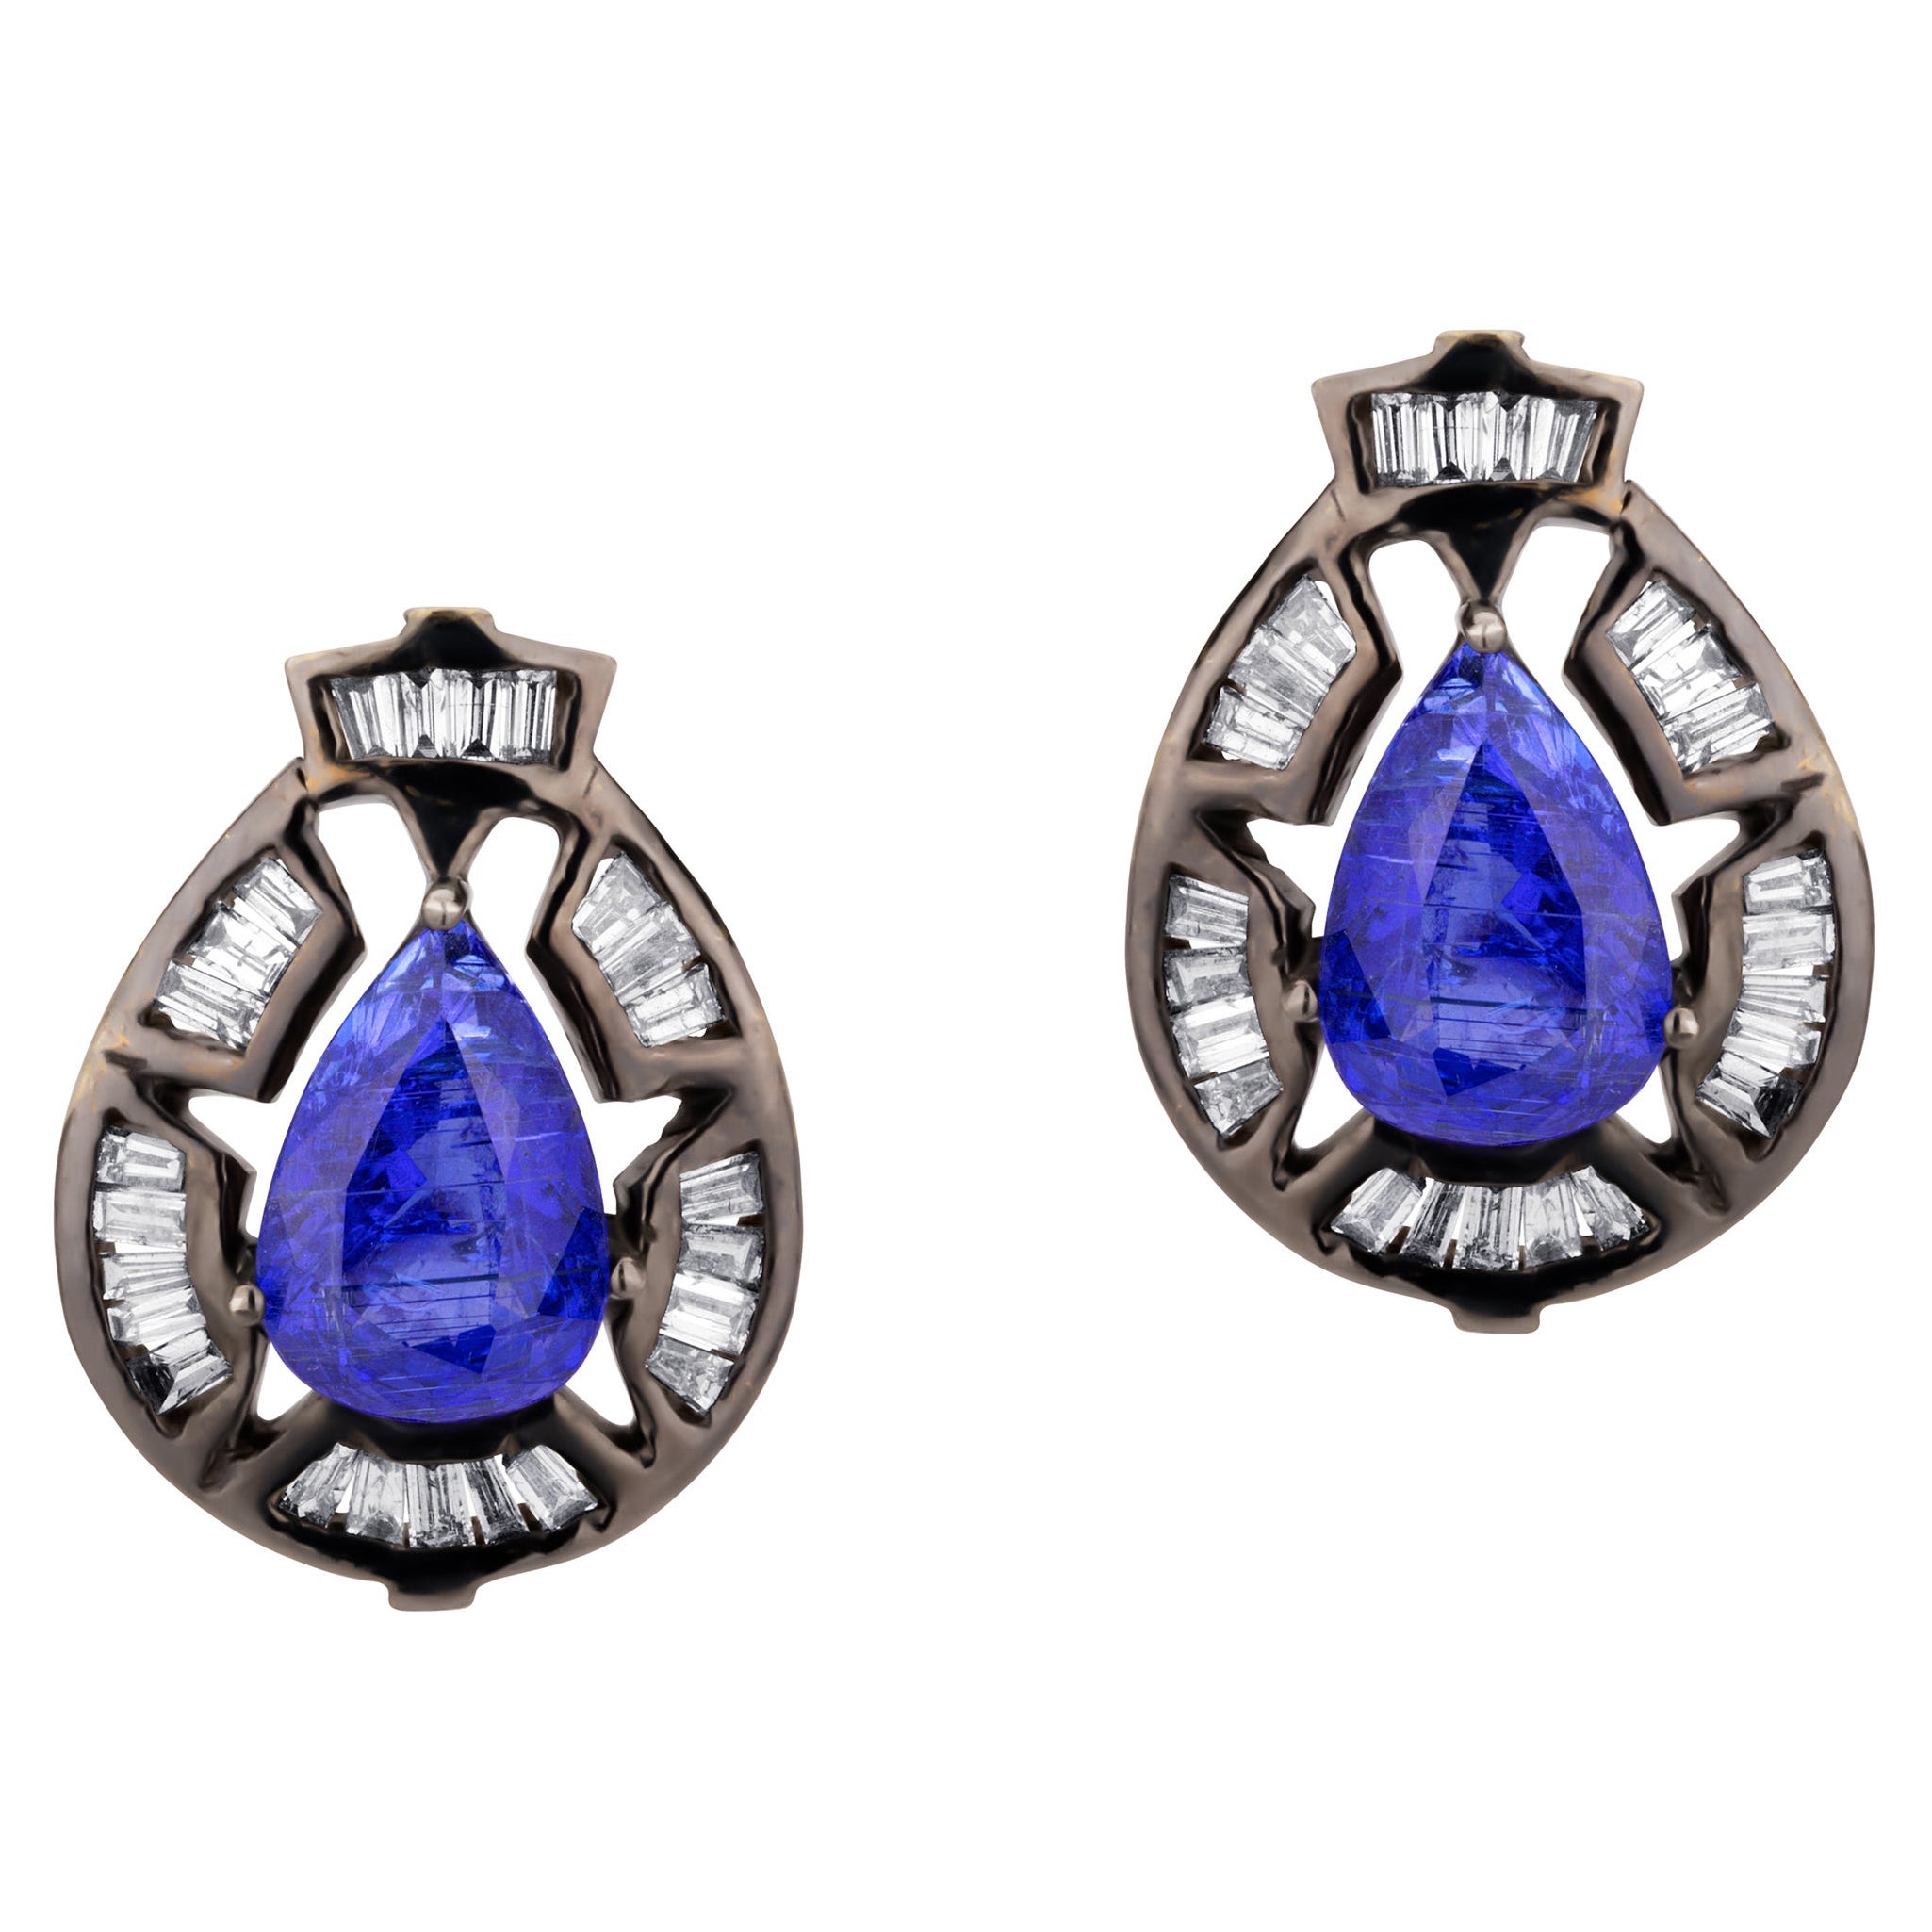  5.48cttw Victorian Tanzanite and Diamond Victorian Stud Earrings in 18k Gold